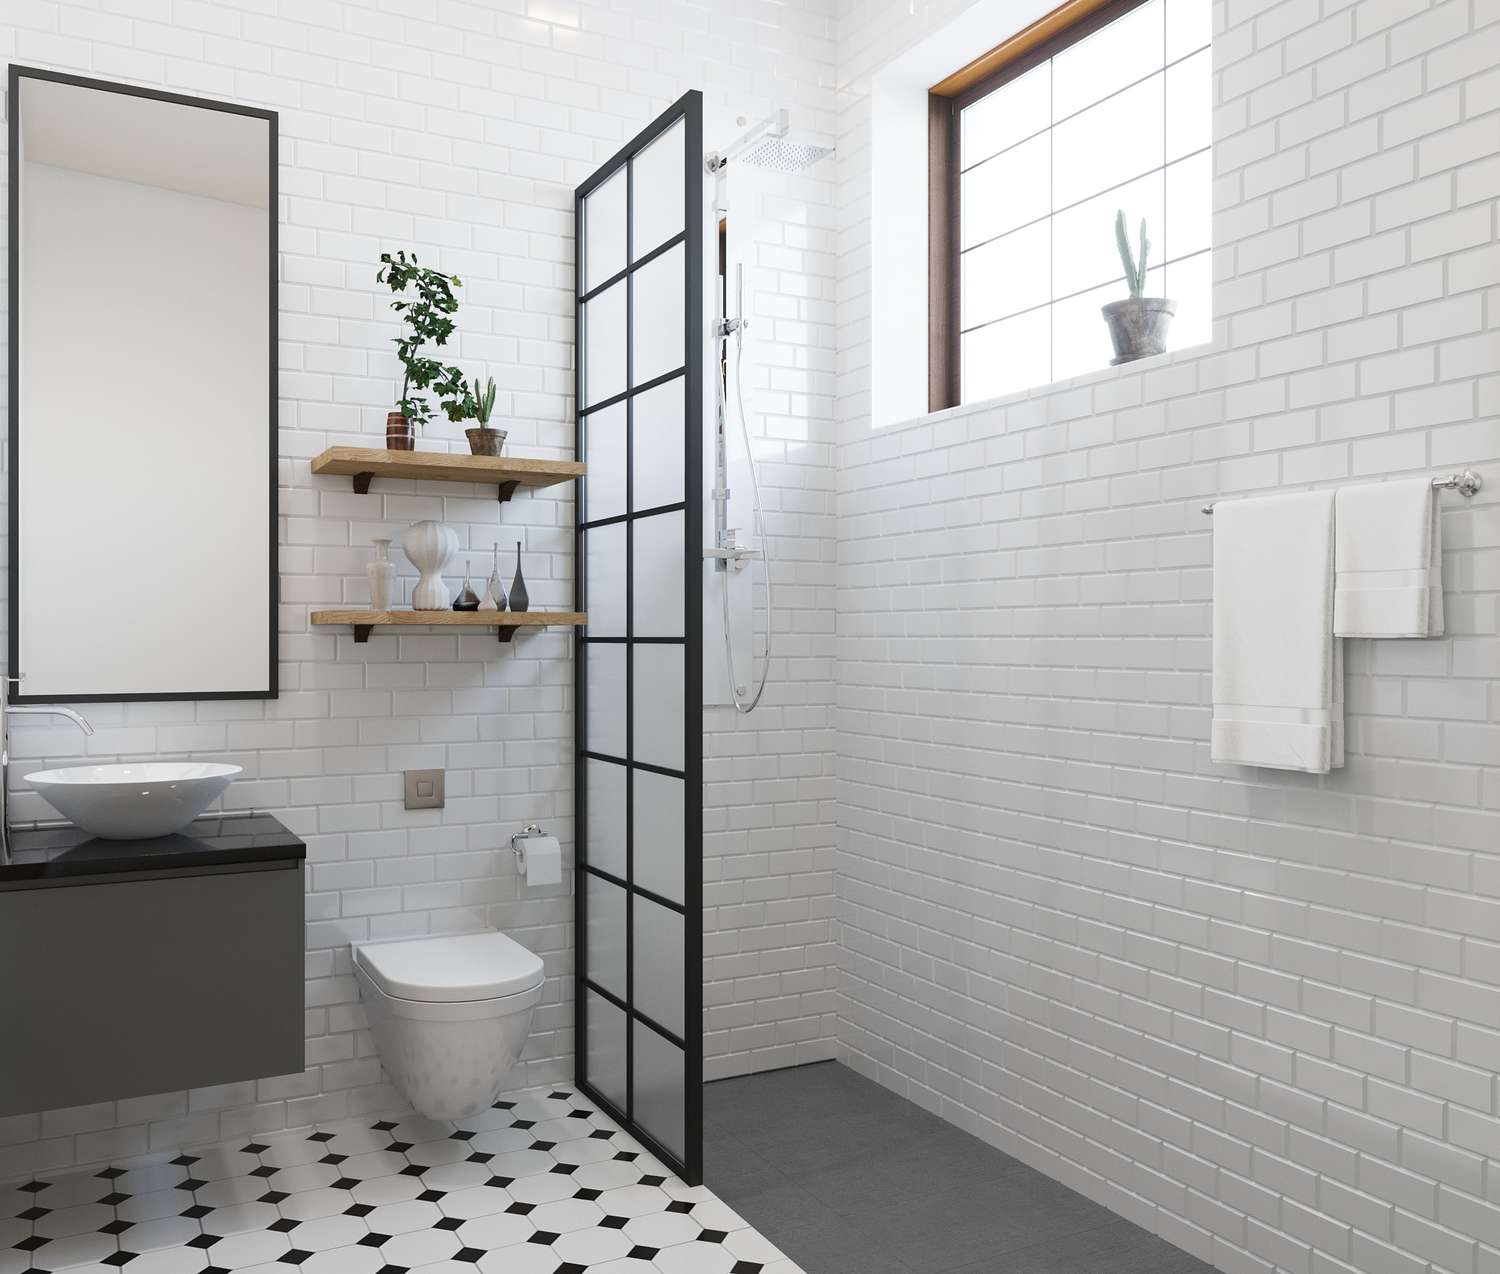 How Much Does A Small Bathroom Renovation Cost?